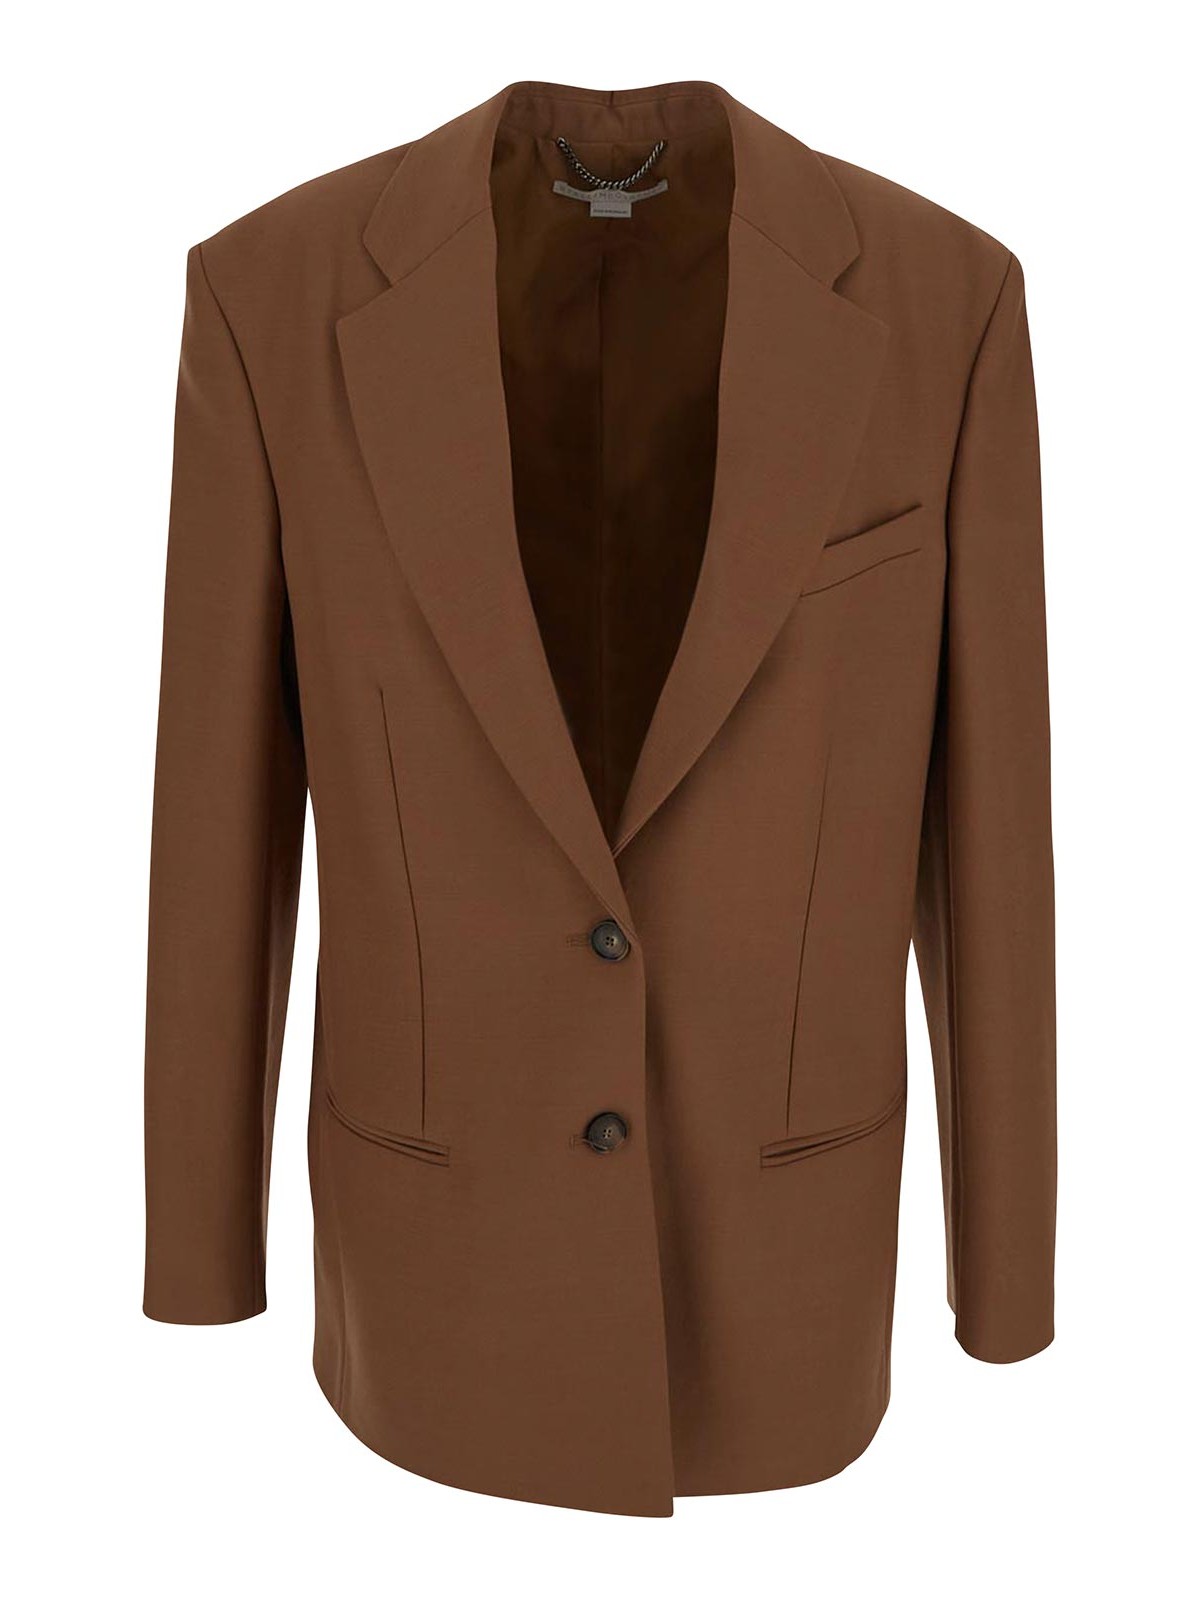 STELLA MCCARTNEY JACKET IN TOBACCO WITH NOTCHED LAPELS